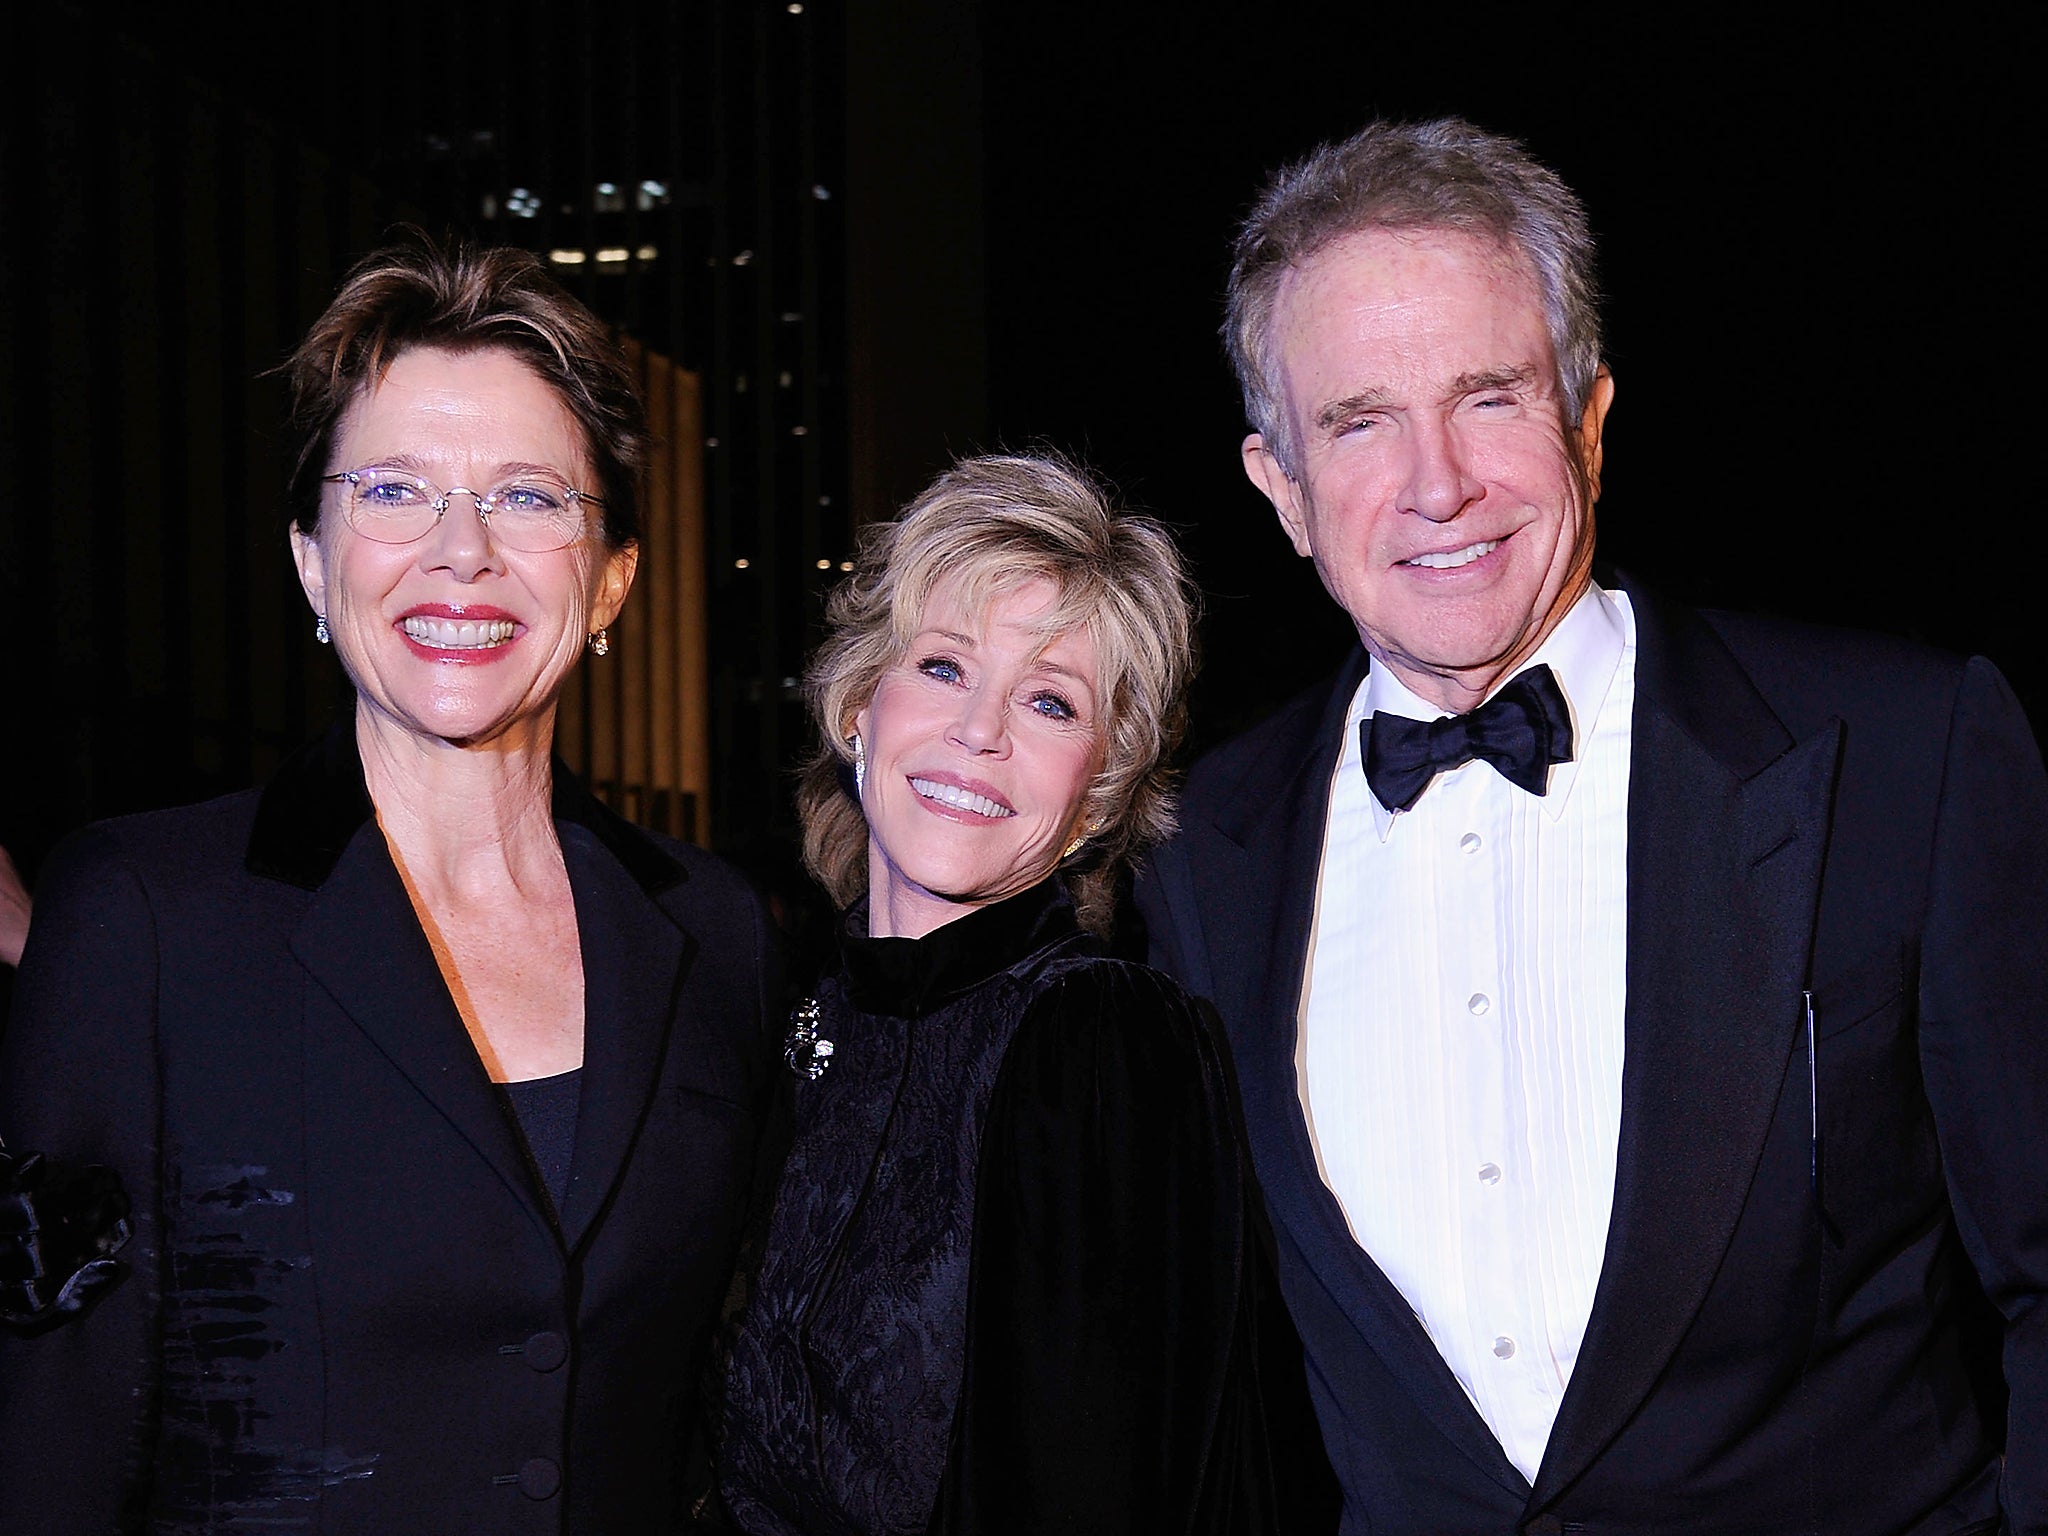 Warren Beatty, pictured with Annette Bening and Jane Fonda, is said to have slept with as many as 12,367 lovers (Getty)